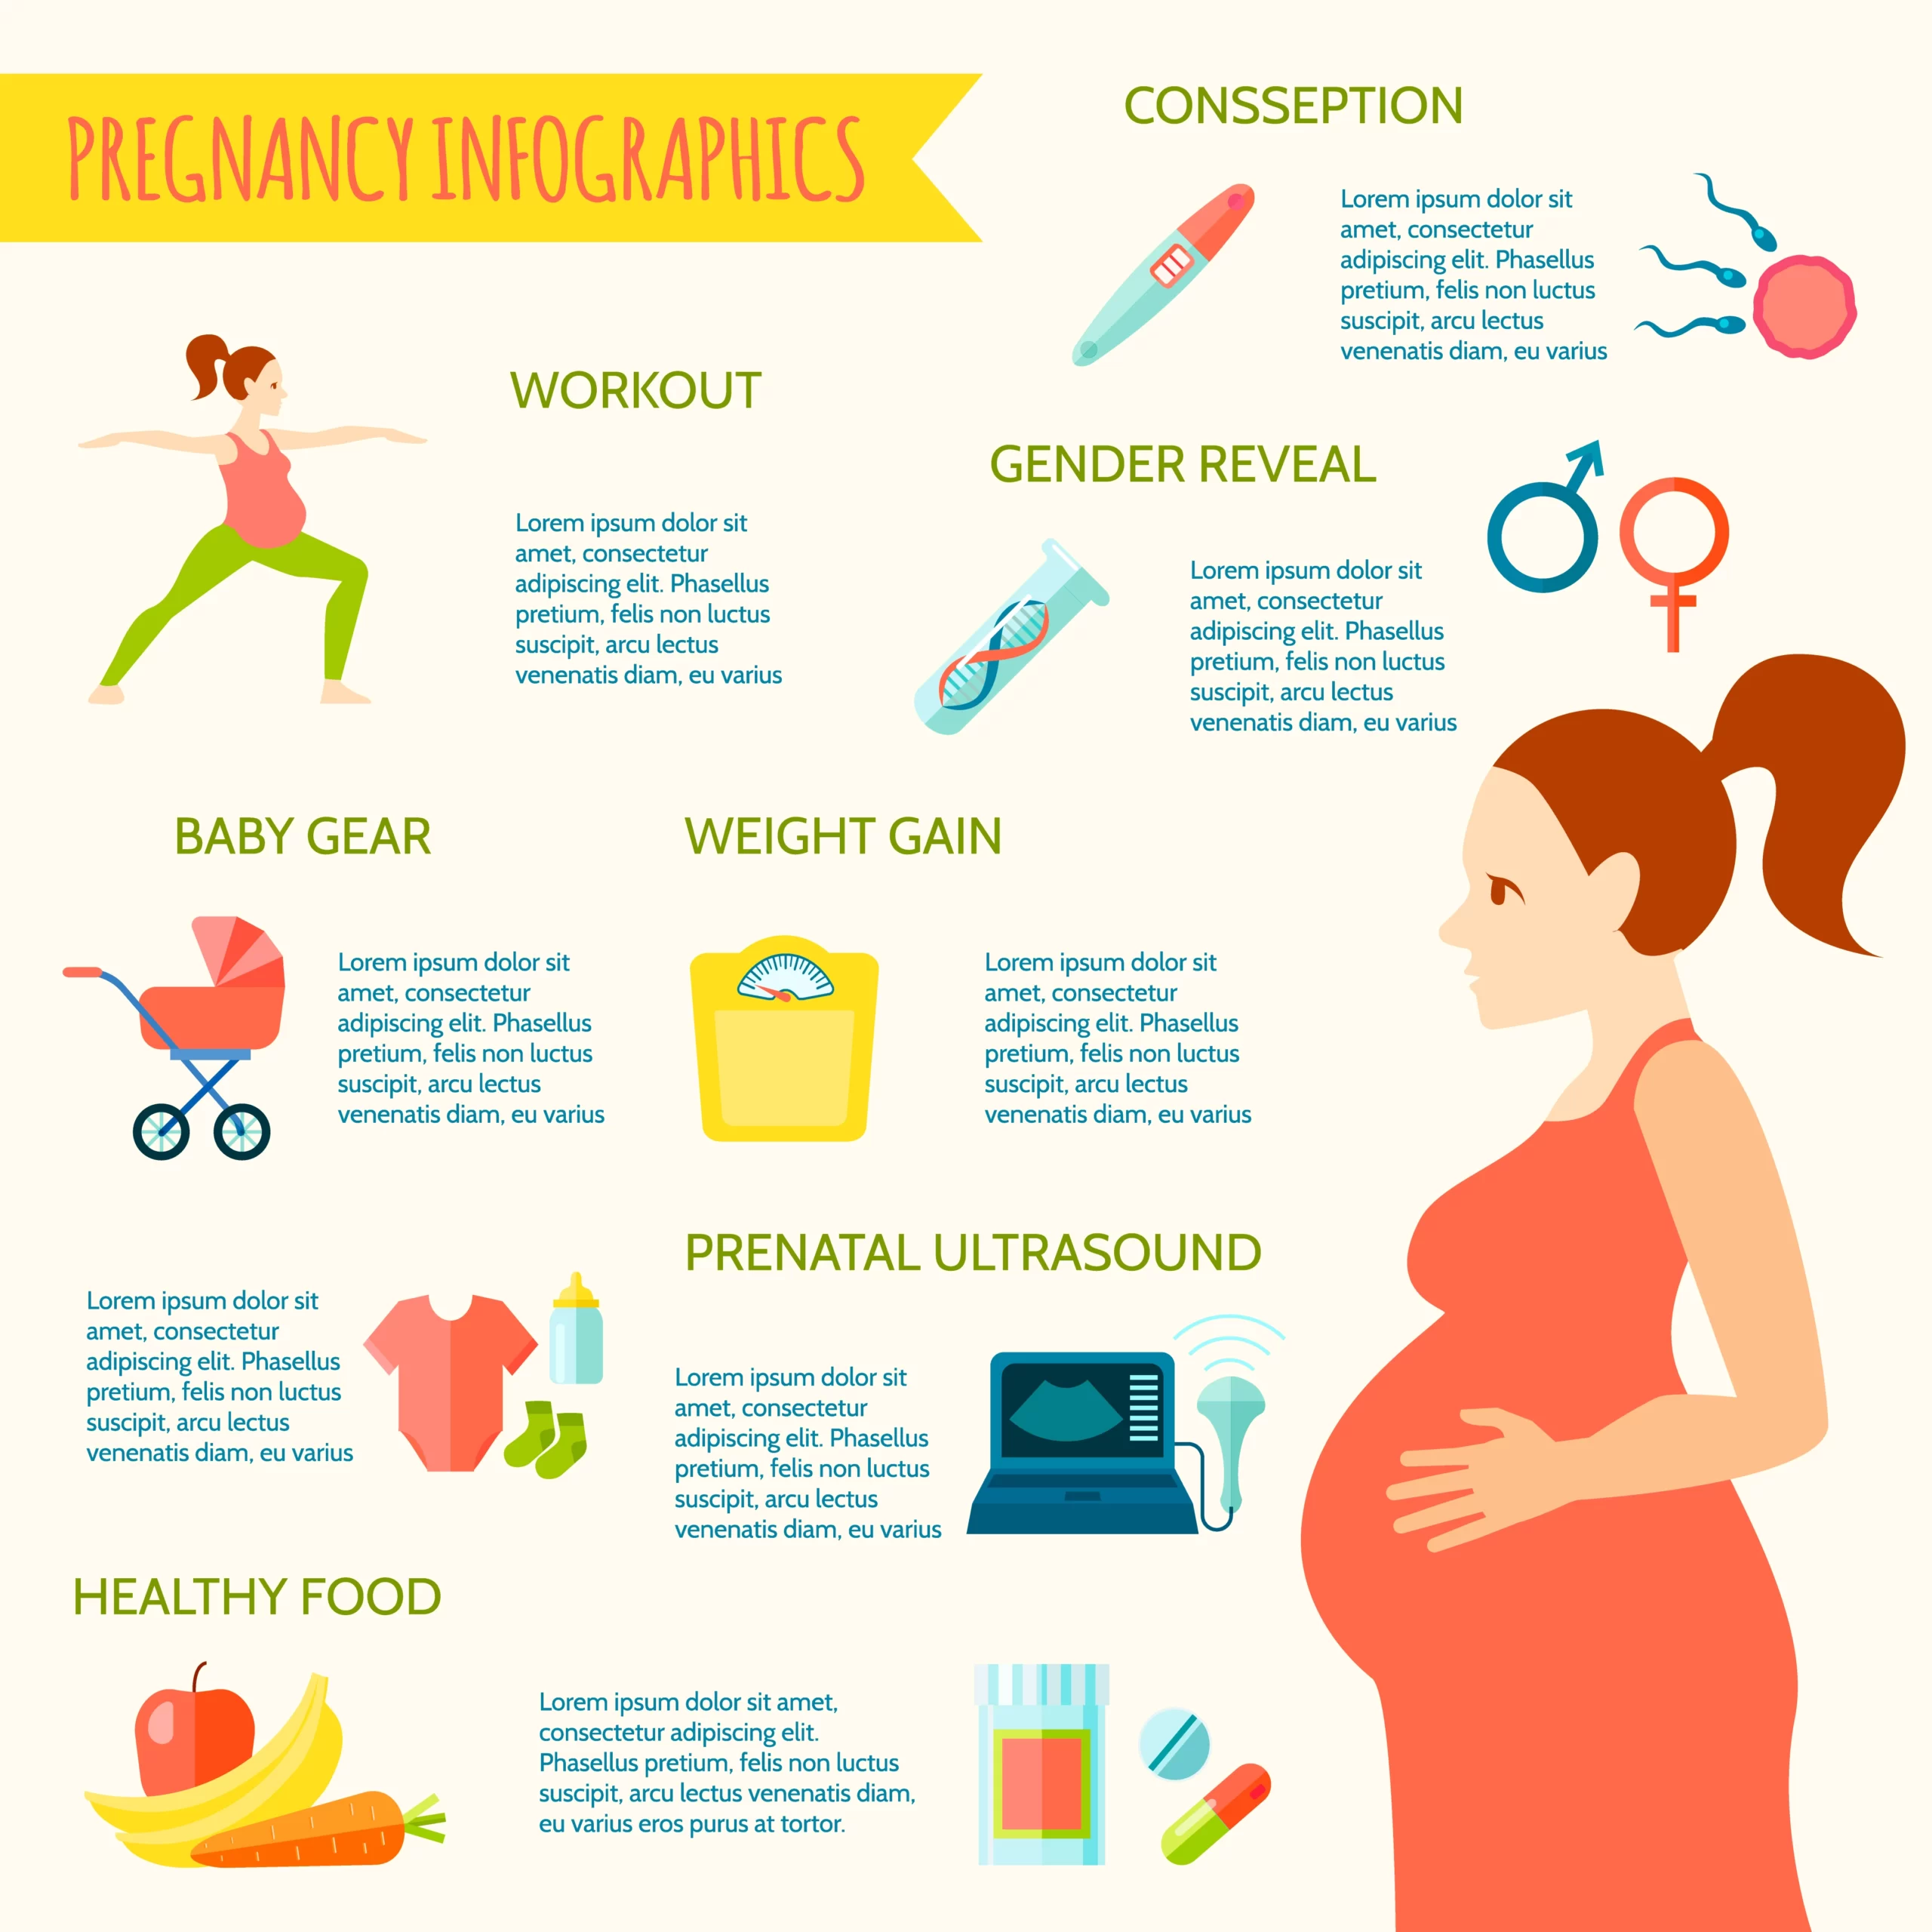 Essential Tips for Pregnant Women